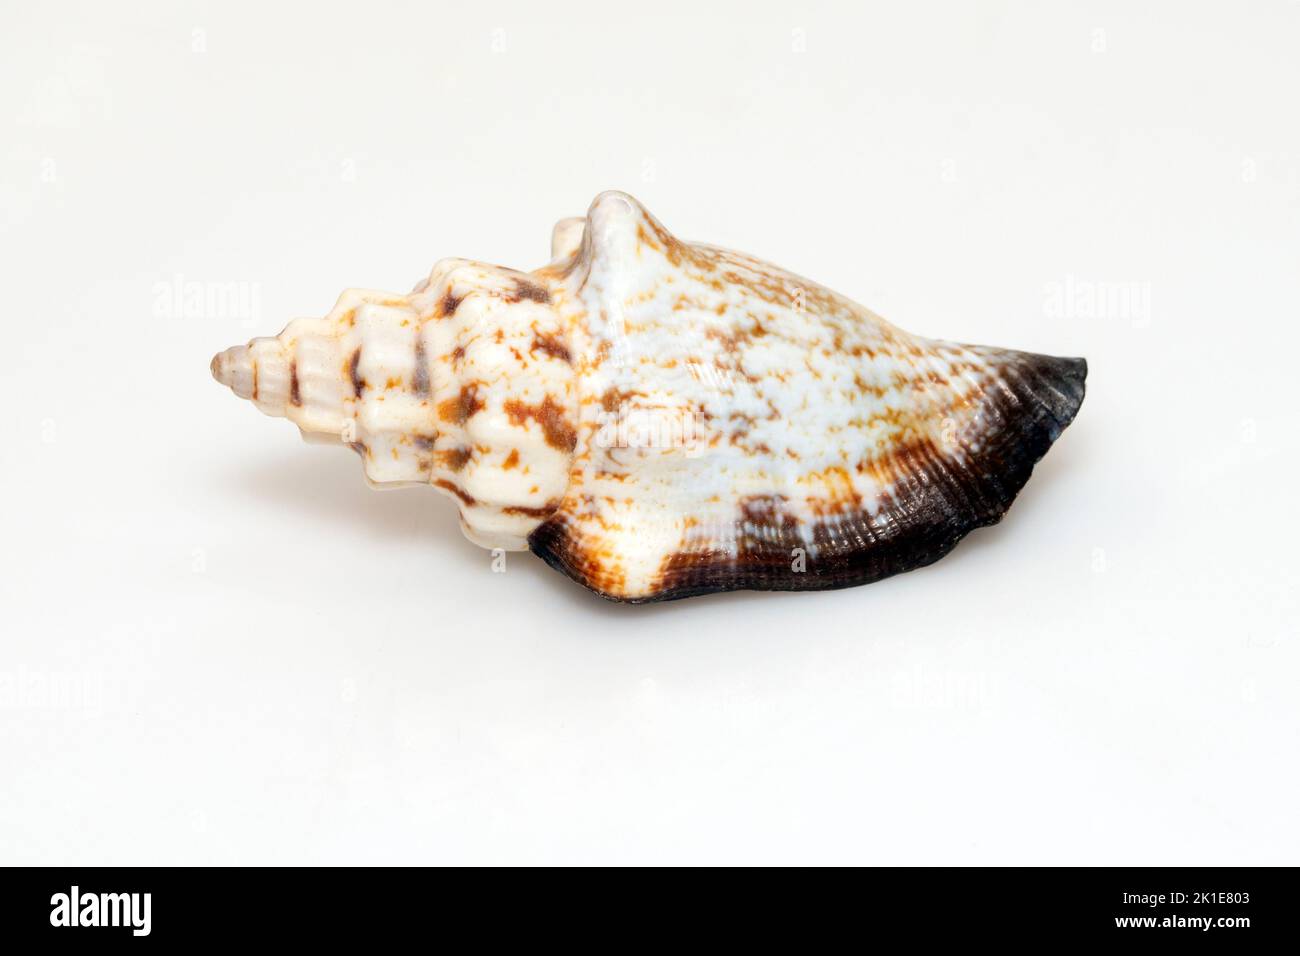 Image of canarium urceus is a species of sea snail, a marine gastropod mollusk in the family Strombidae, the true conchs isolated on white background. Stock Photo